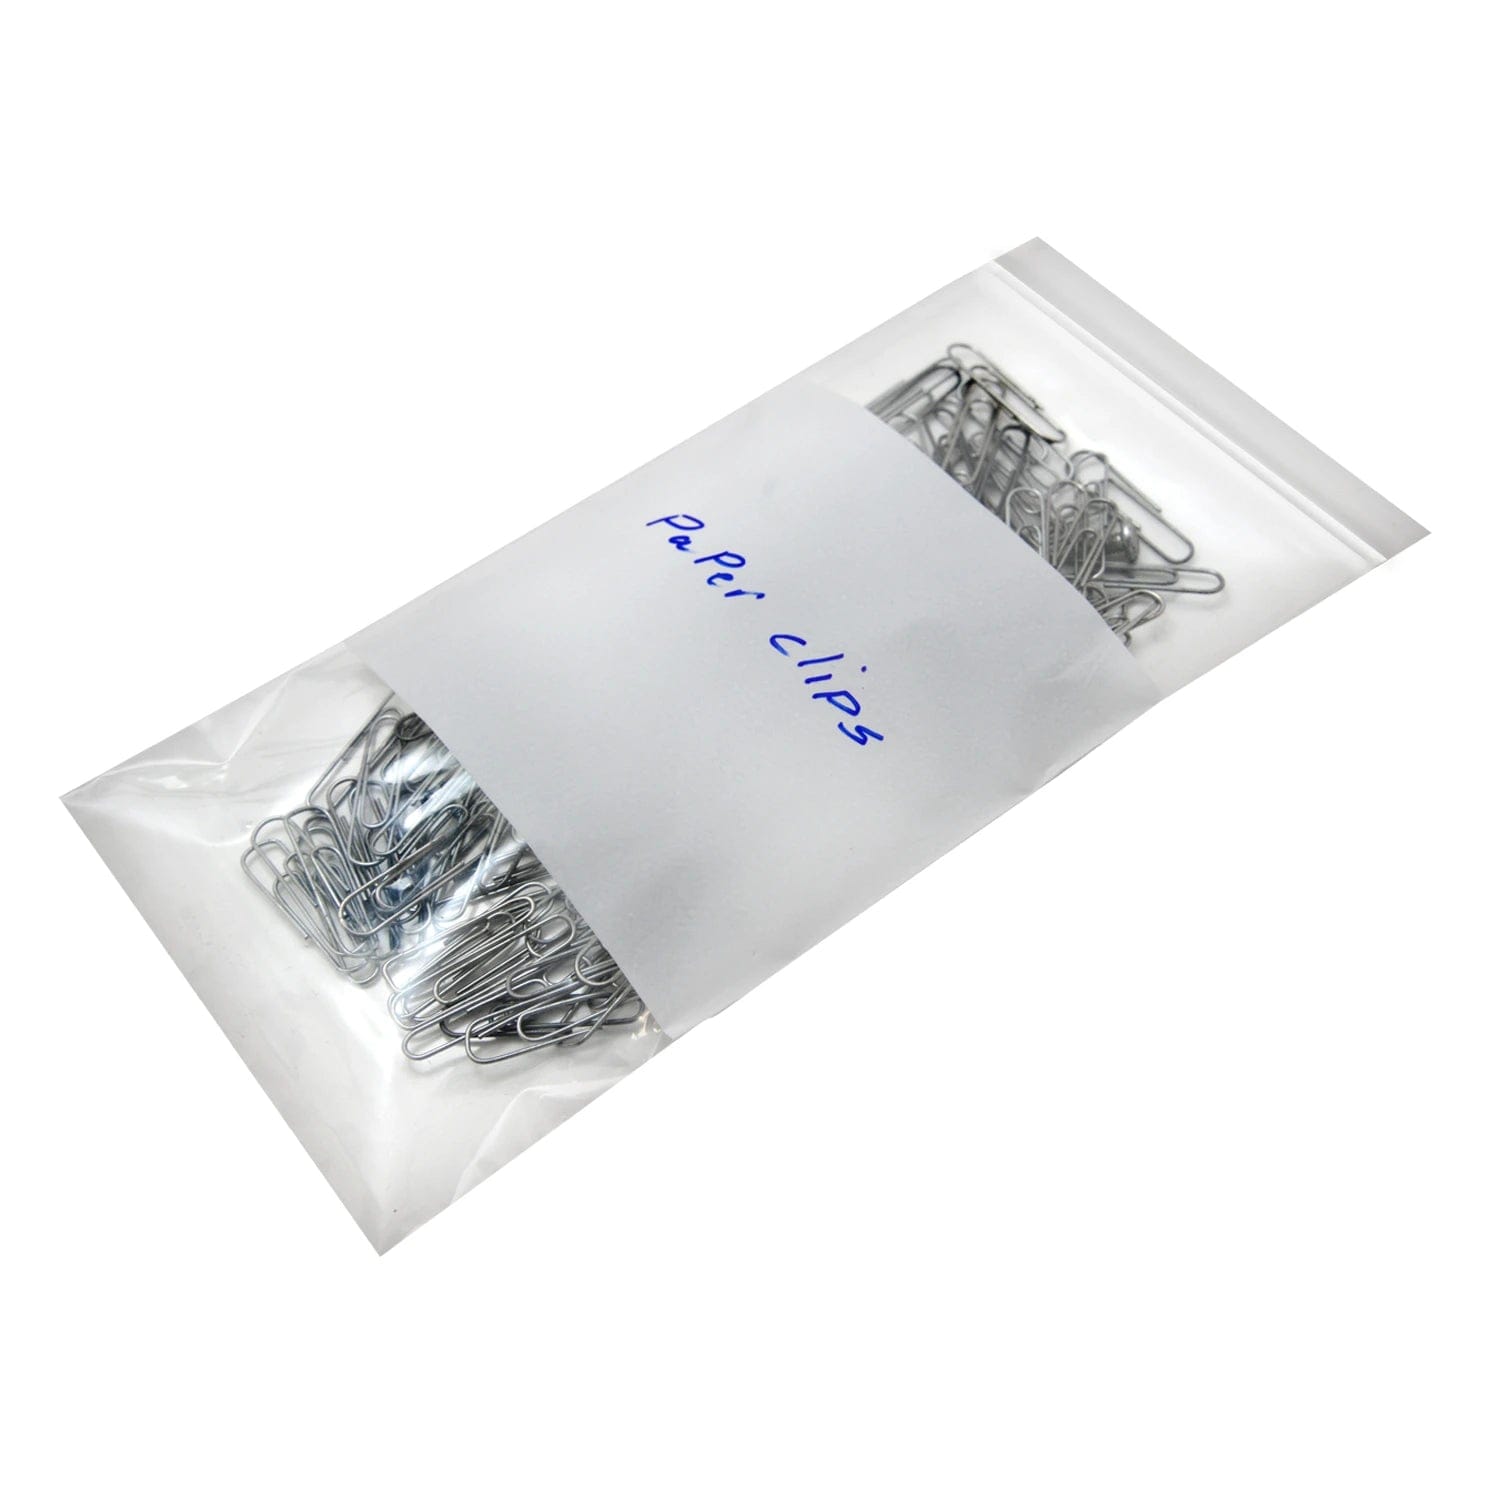 Choice 2 x 3 2 Mil Clear LDPE Zip Top Bag with Hanging Hole - 1000/Case